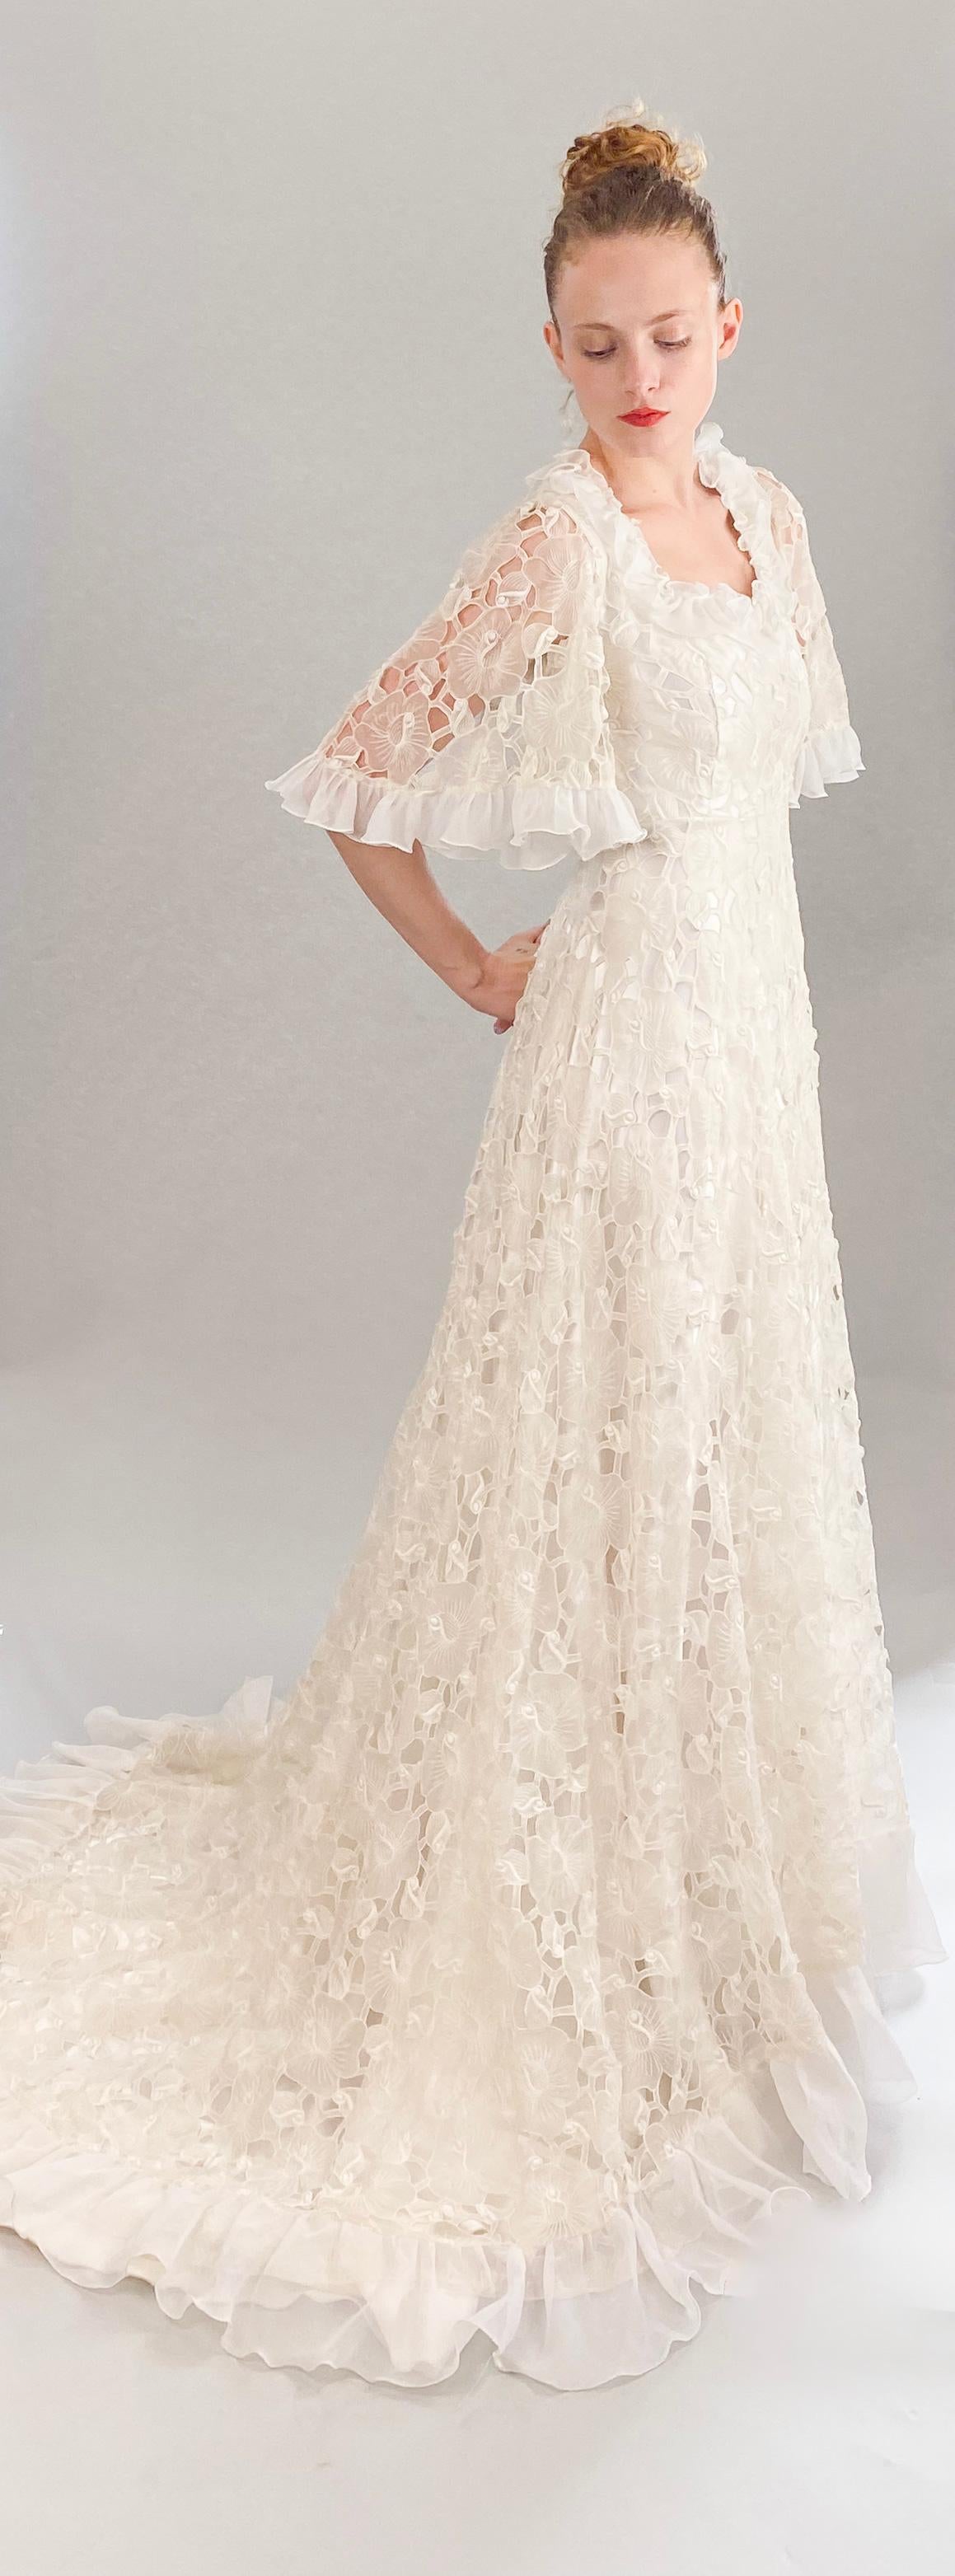 Women's Vintage White Lace Silk Ruffle High Low Wedding Gown For Sale